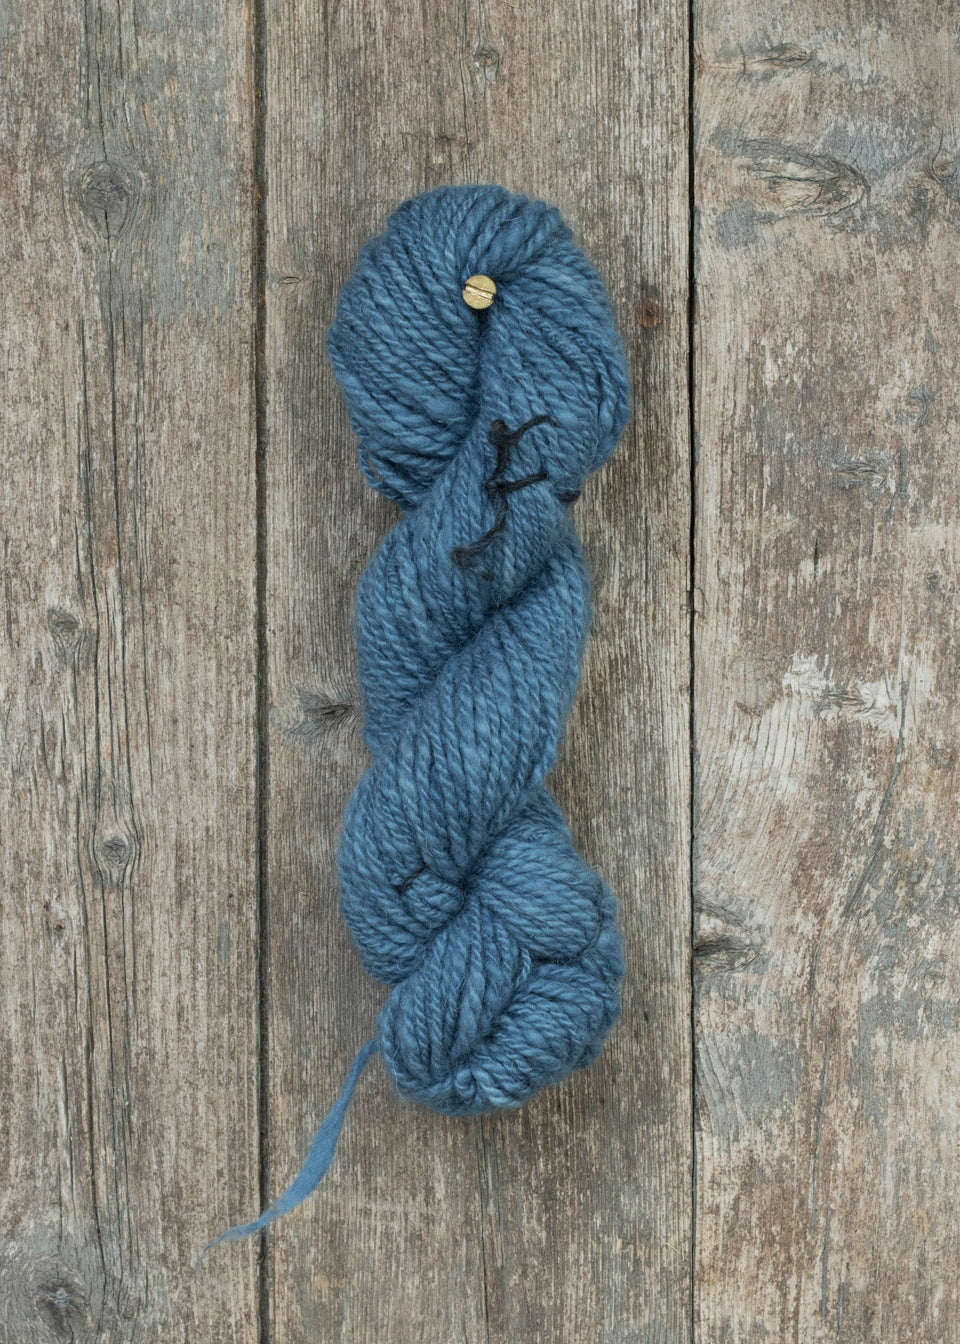 loragub yarn. hand-spun, hand-dyed with natural indigo. angora and merino mix in a rustic style